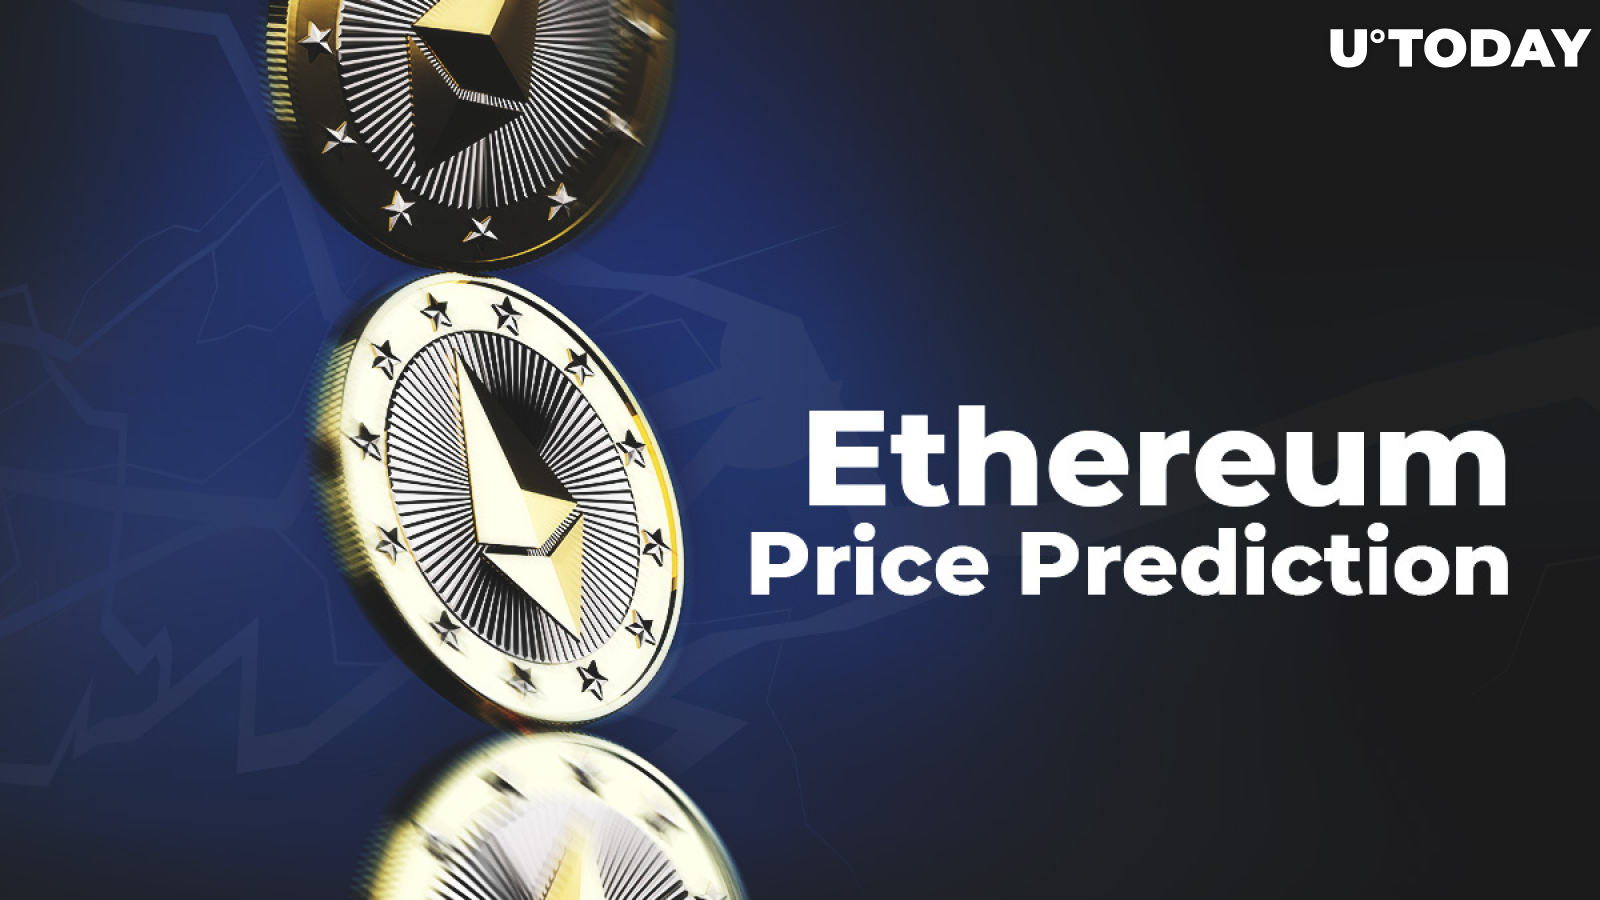 Ethereum Price Prediction — $30 Bln Market Cap Is Reached. Can We Expect New Levels in 2019?